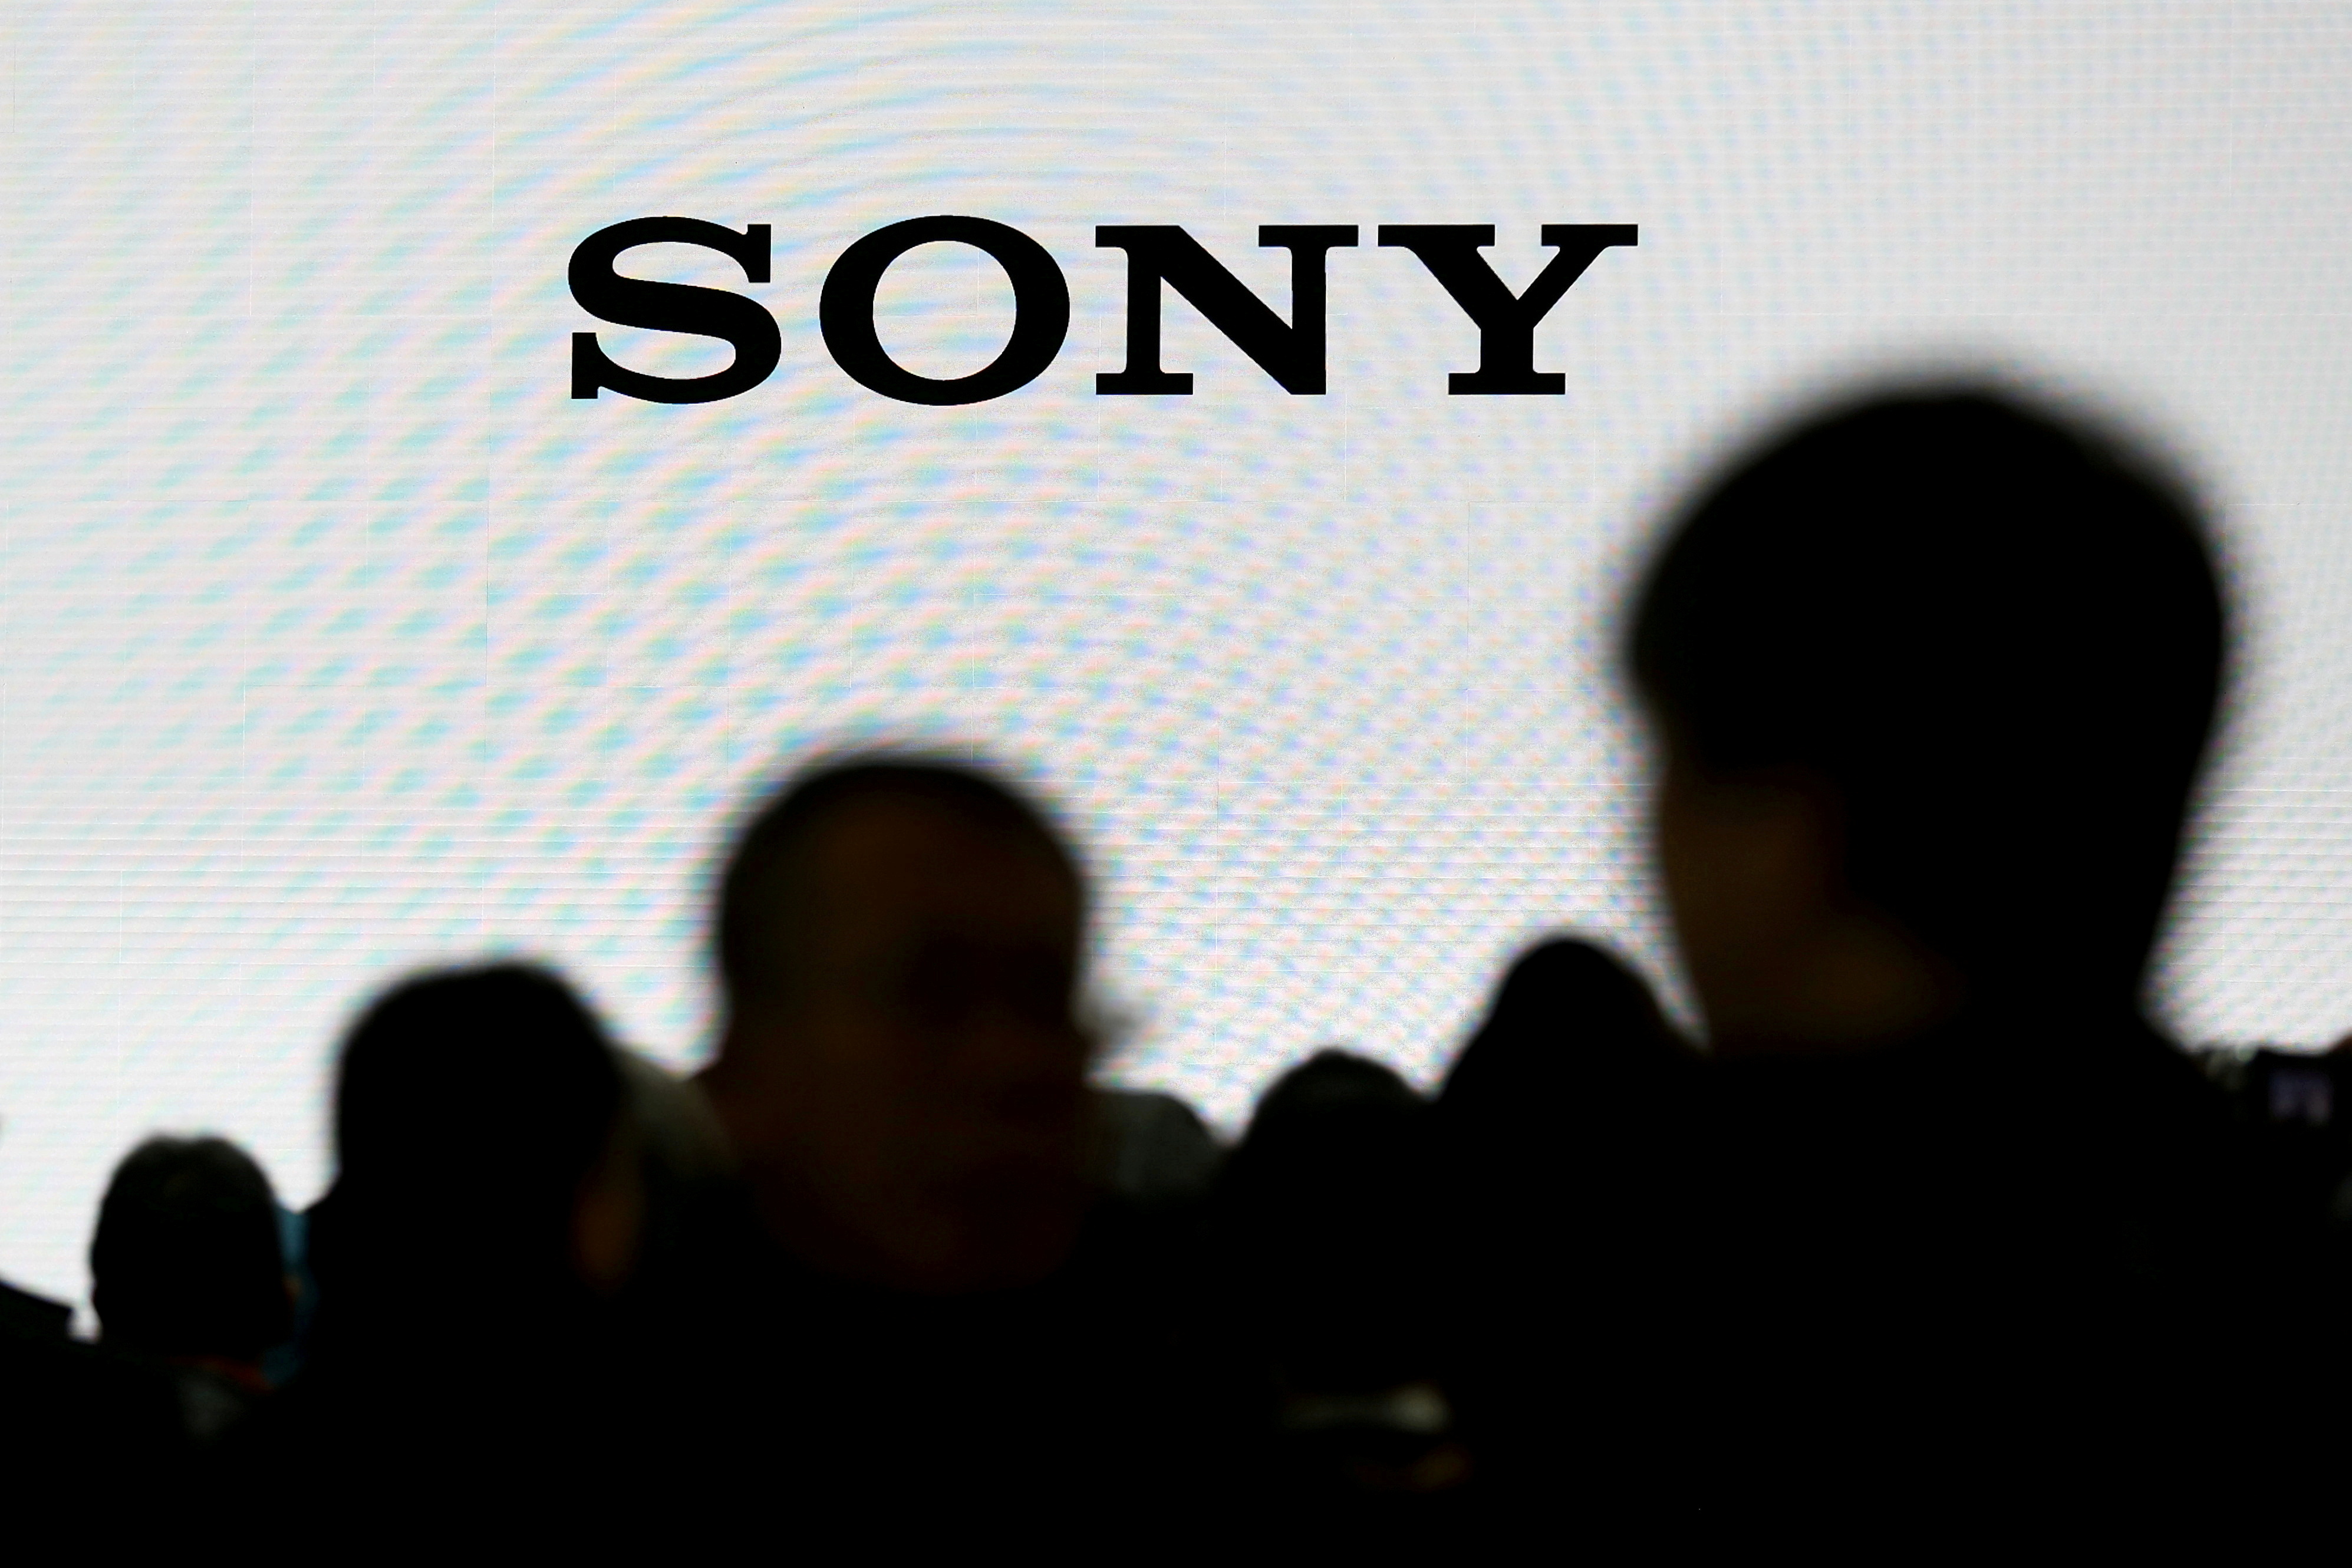 The logo of Sony Corp is seen at the CP+ camera and photo trade fair in Yokohama, Japan, Feb. 25, 2016. REUTERS/Thomas Peter